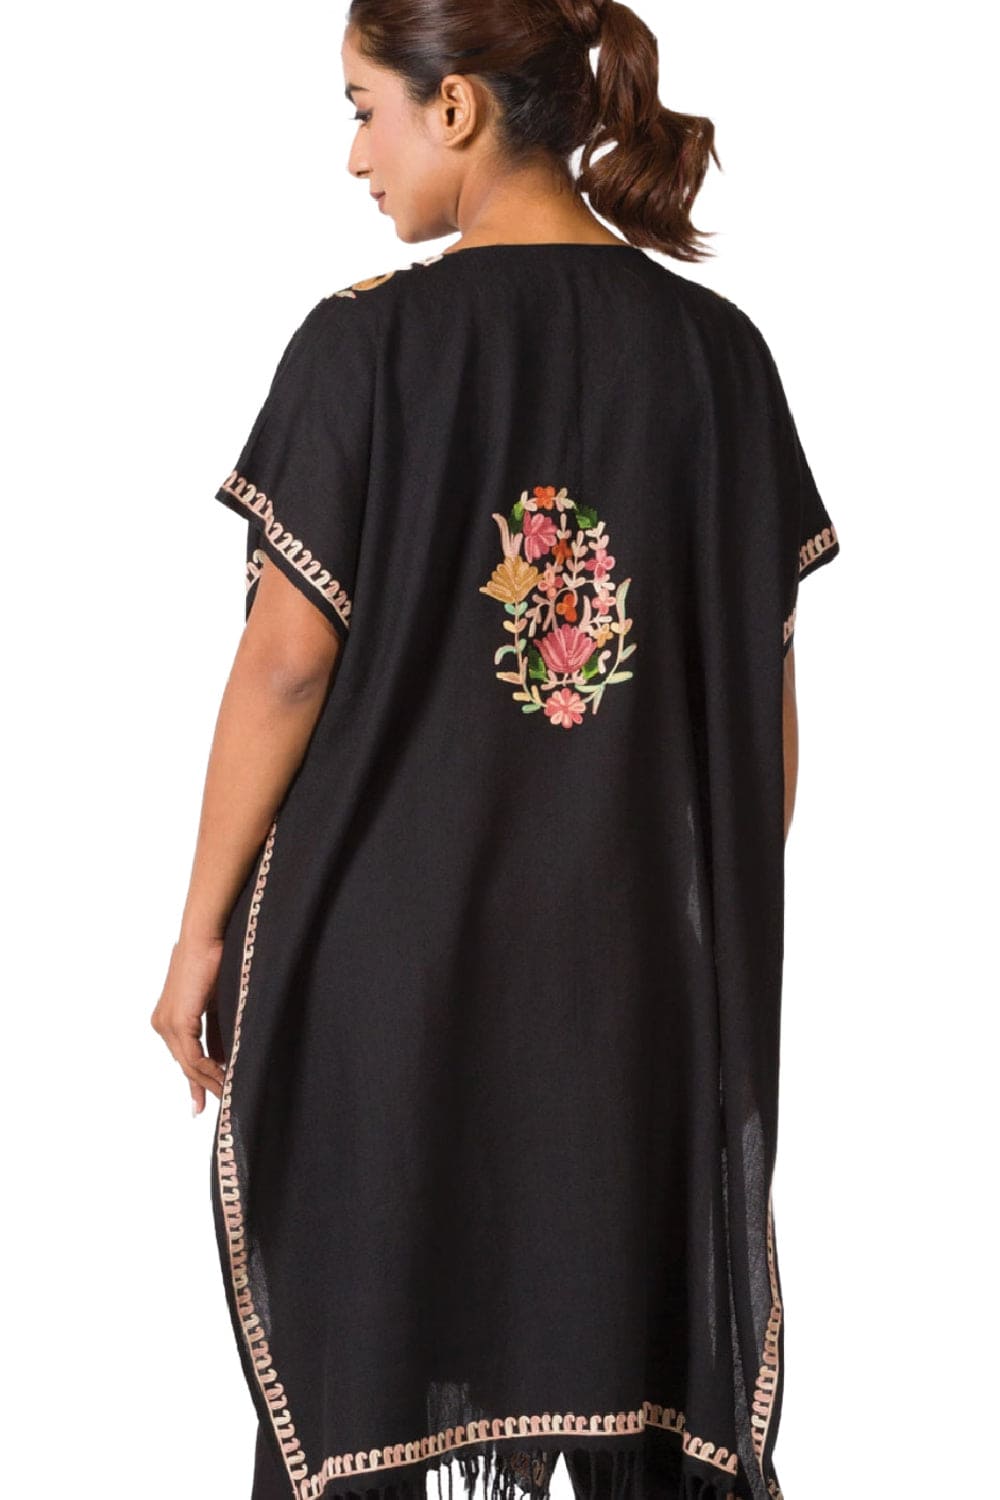 Women's Caftan back view with embroidery.